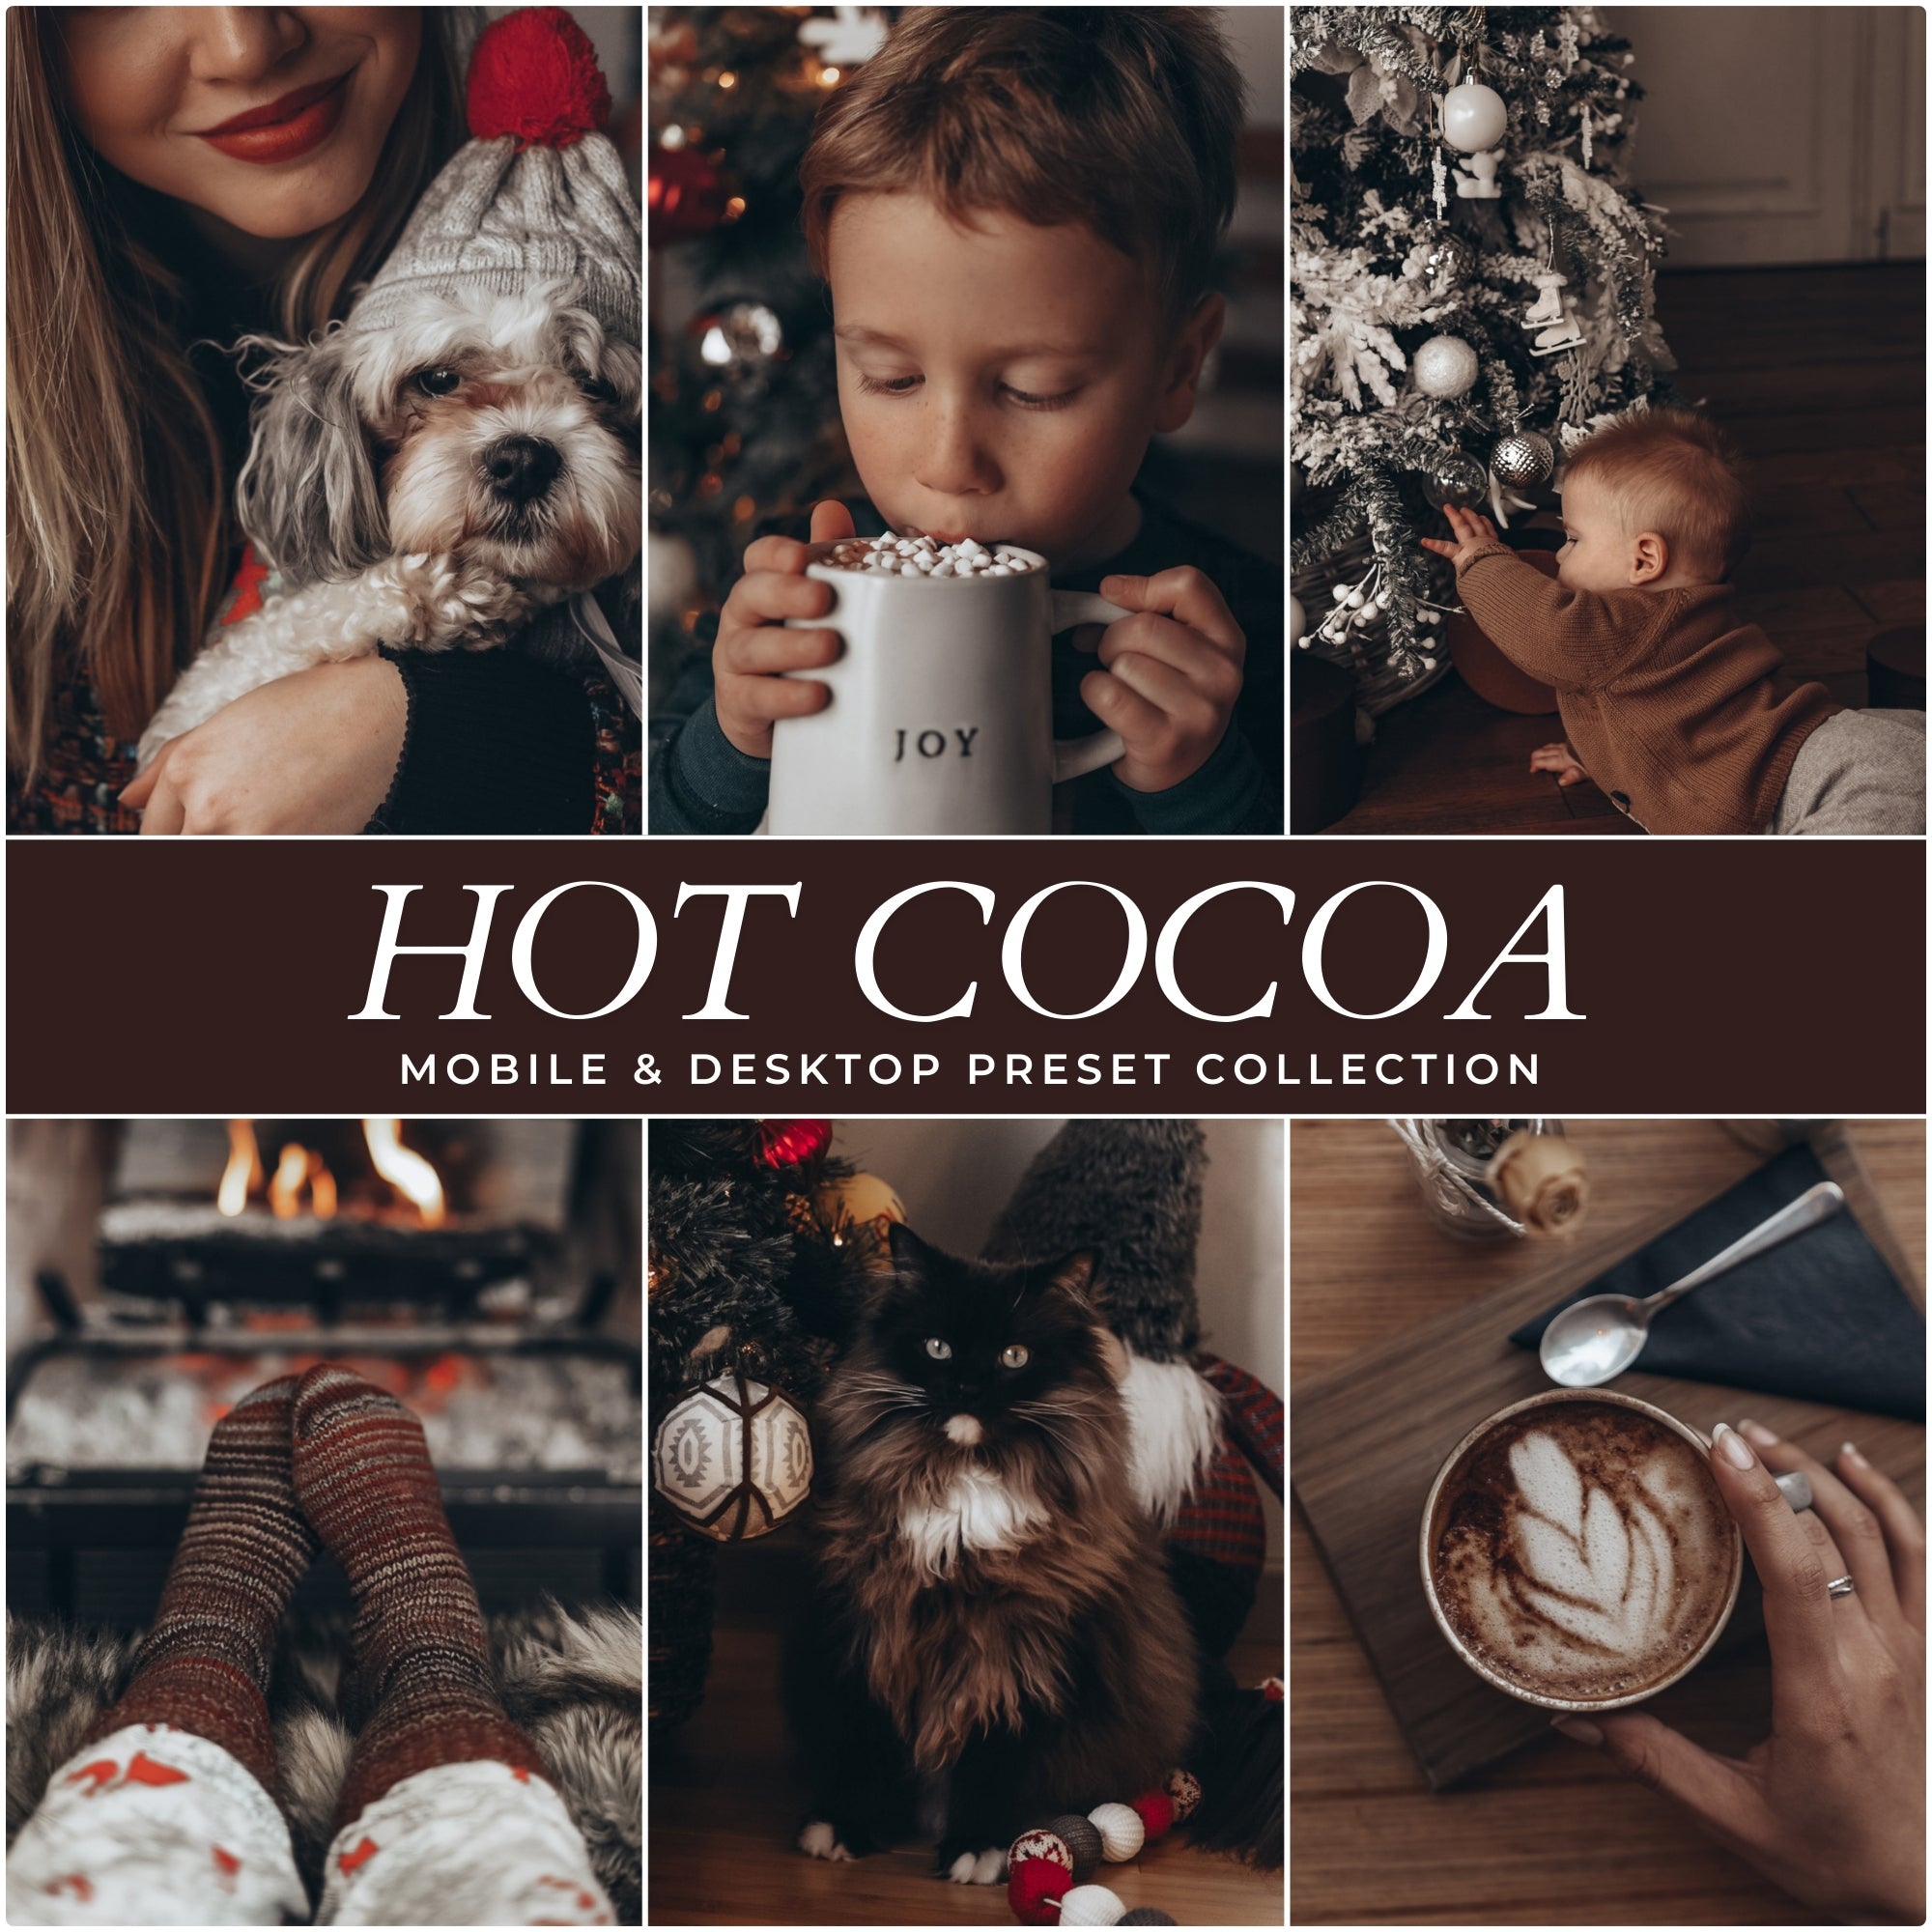 Hot Cocoa Christmas Lightroom Presets For Photographers and Instagram Influencers Photo Editing In Adobe Lightroom By Lou And Marks Presets